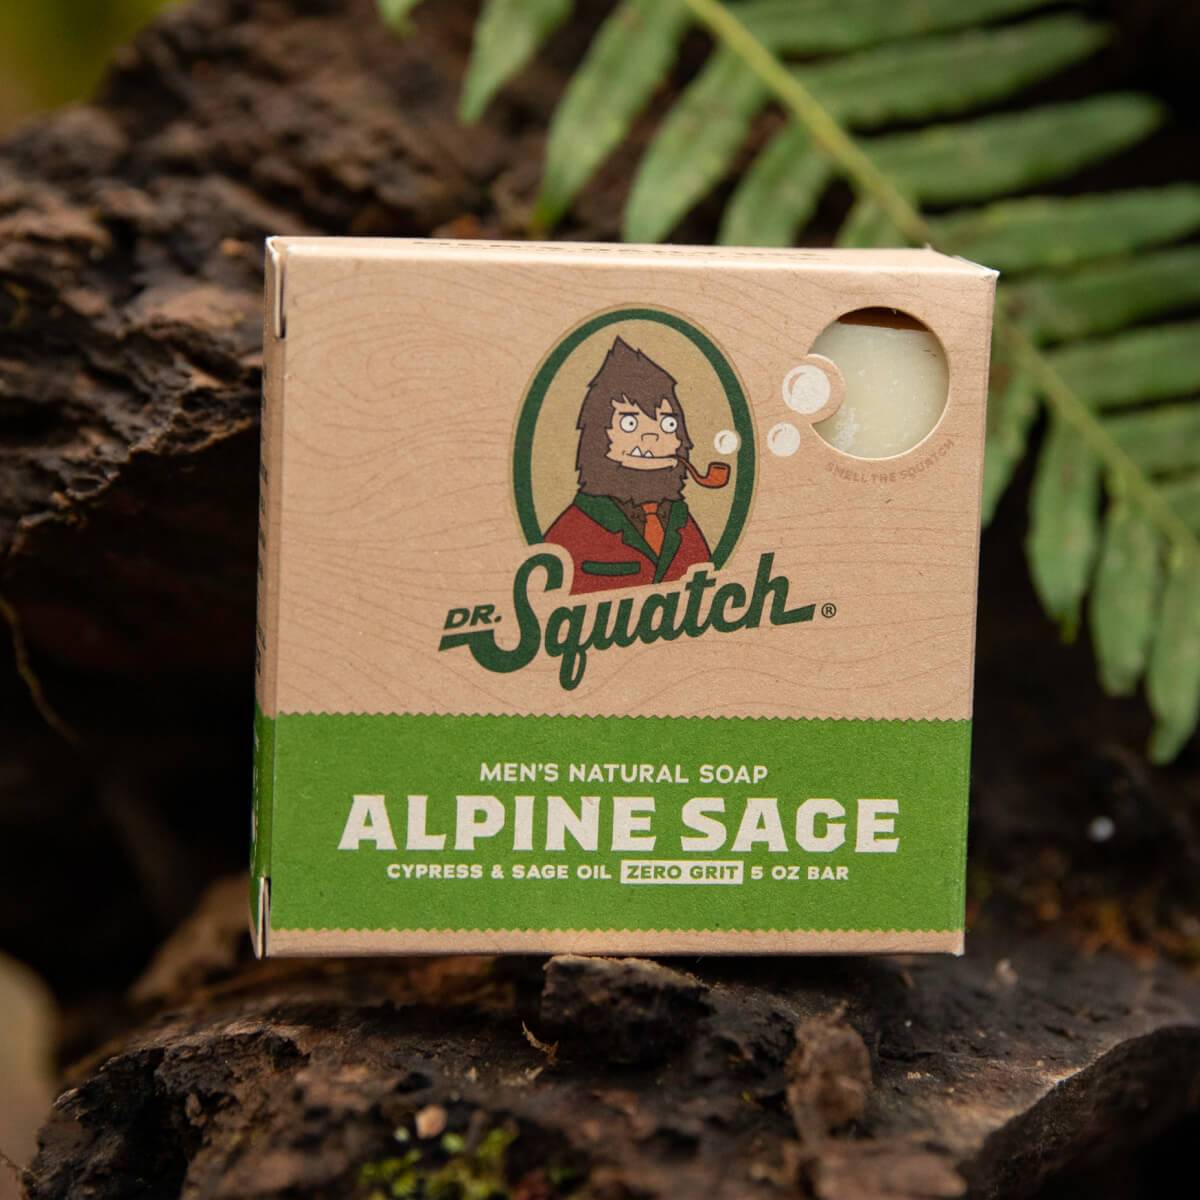 Cost-Savvy Dr. Squatch Soap - The Hottest Gift For The Holidays